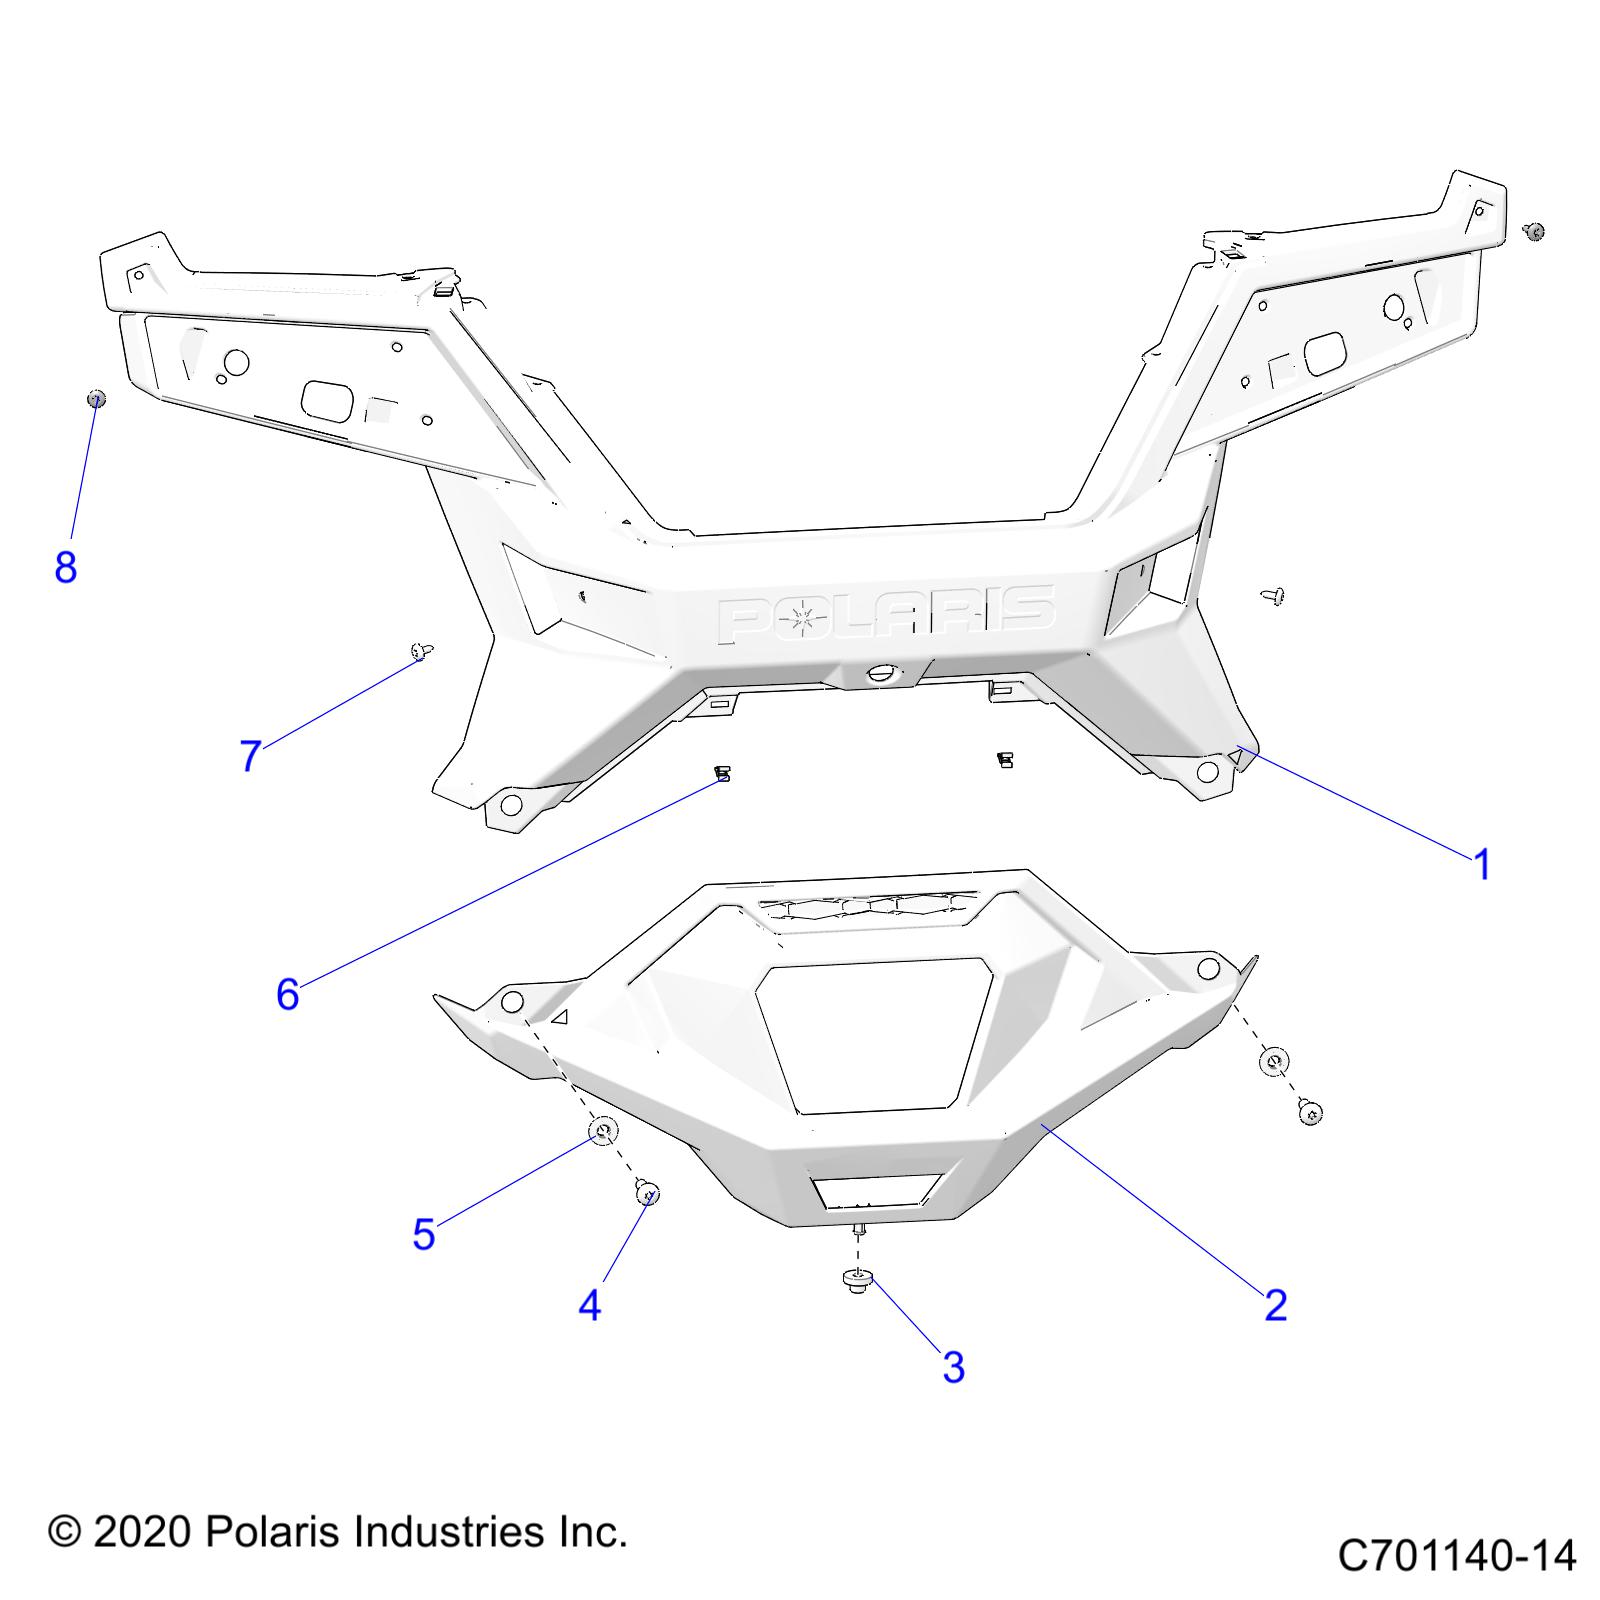 Part Number : 7520369 SCR-M10X1.5X35 TX/TRUSS ZODP30